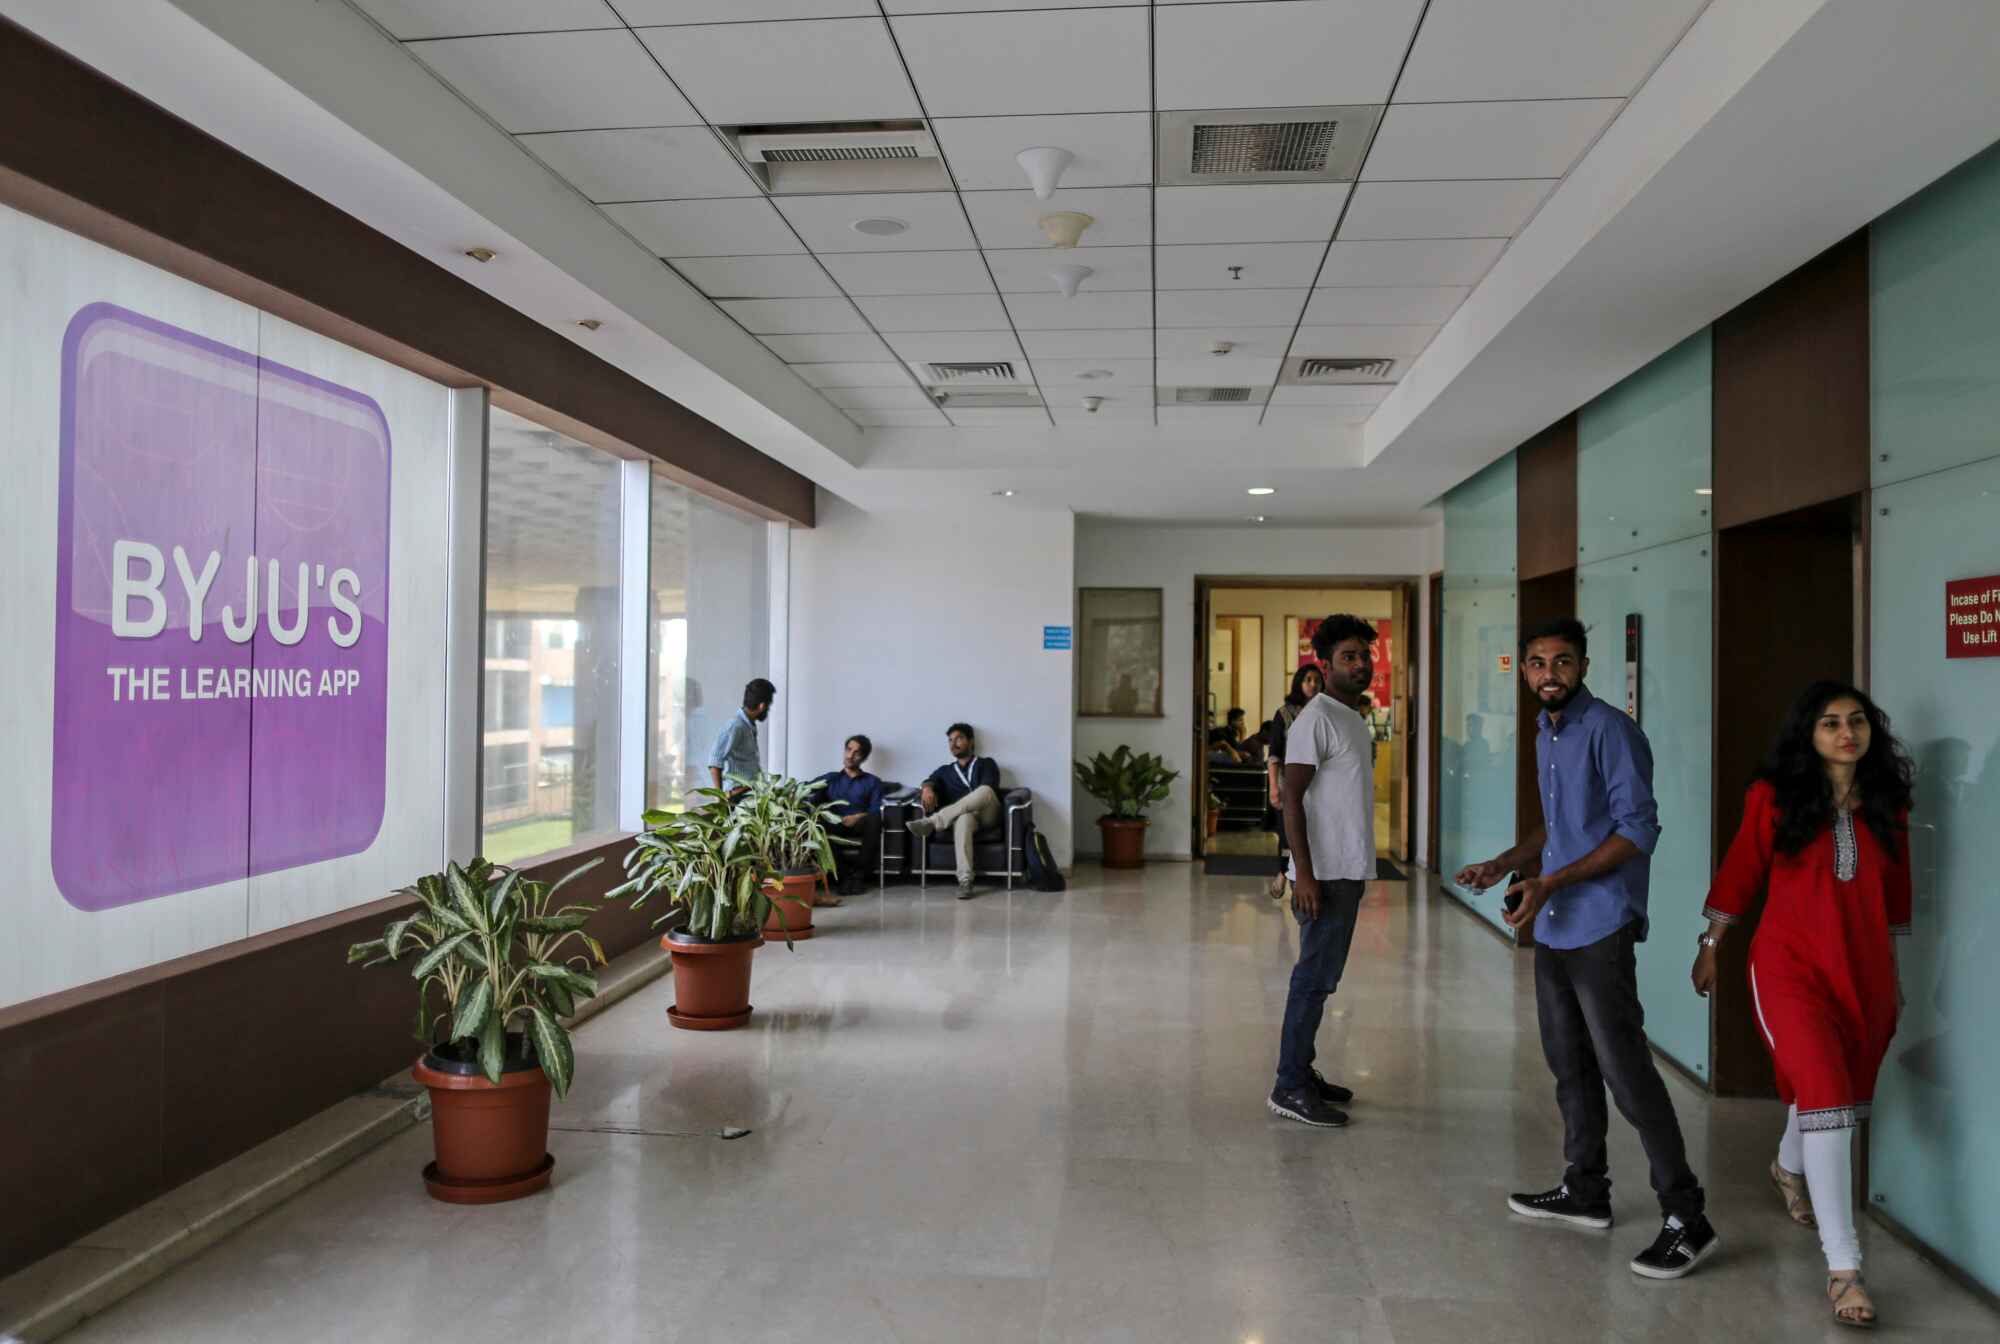 New Controversy Surrounding Byju’s: India’s Anti-Money Laundering Agency Uncovers $1 Billion Violation